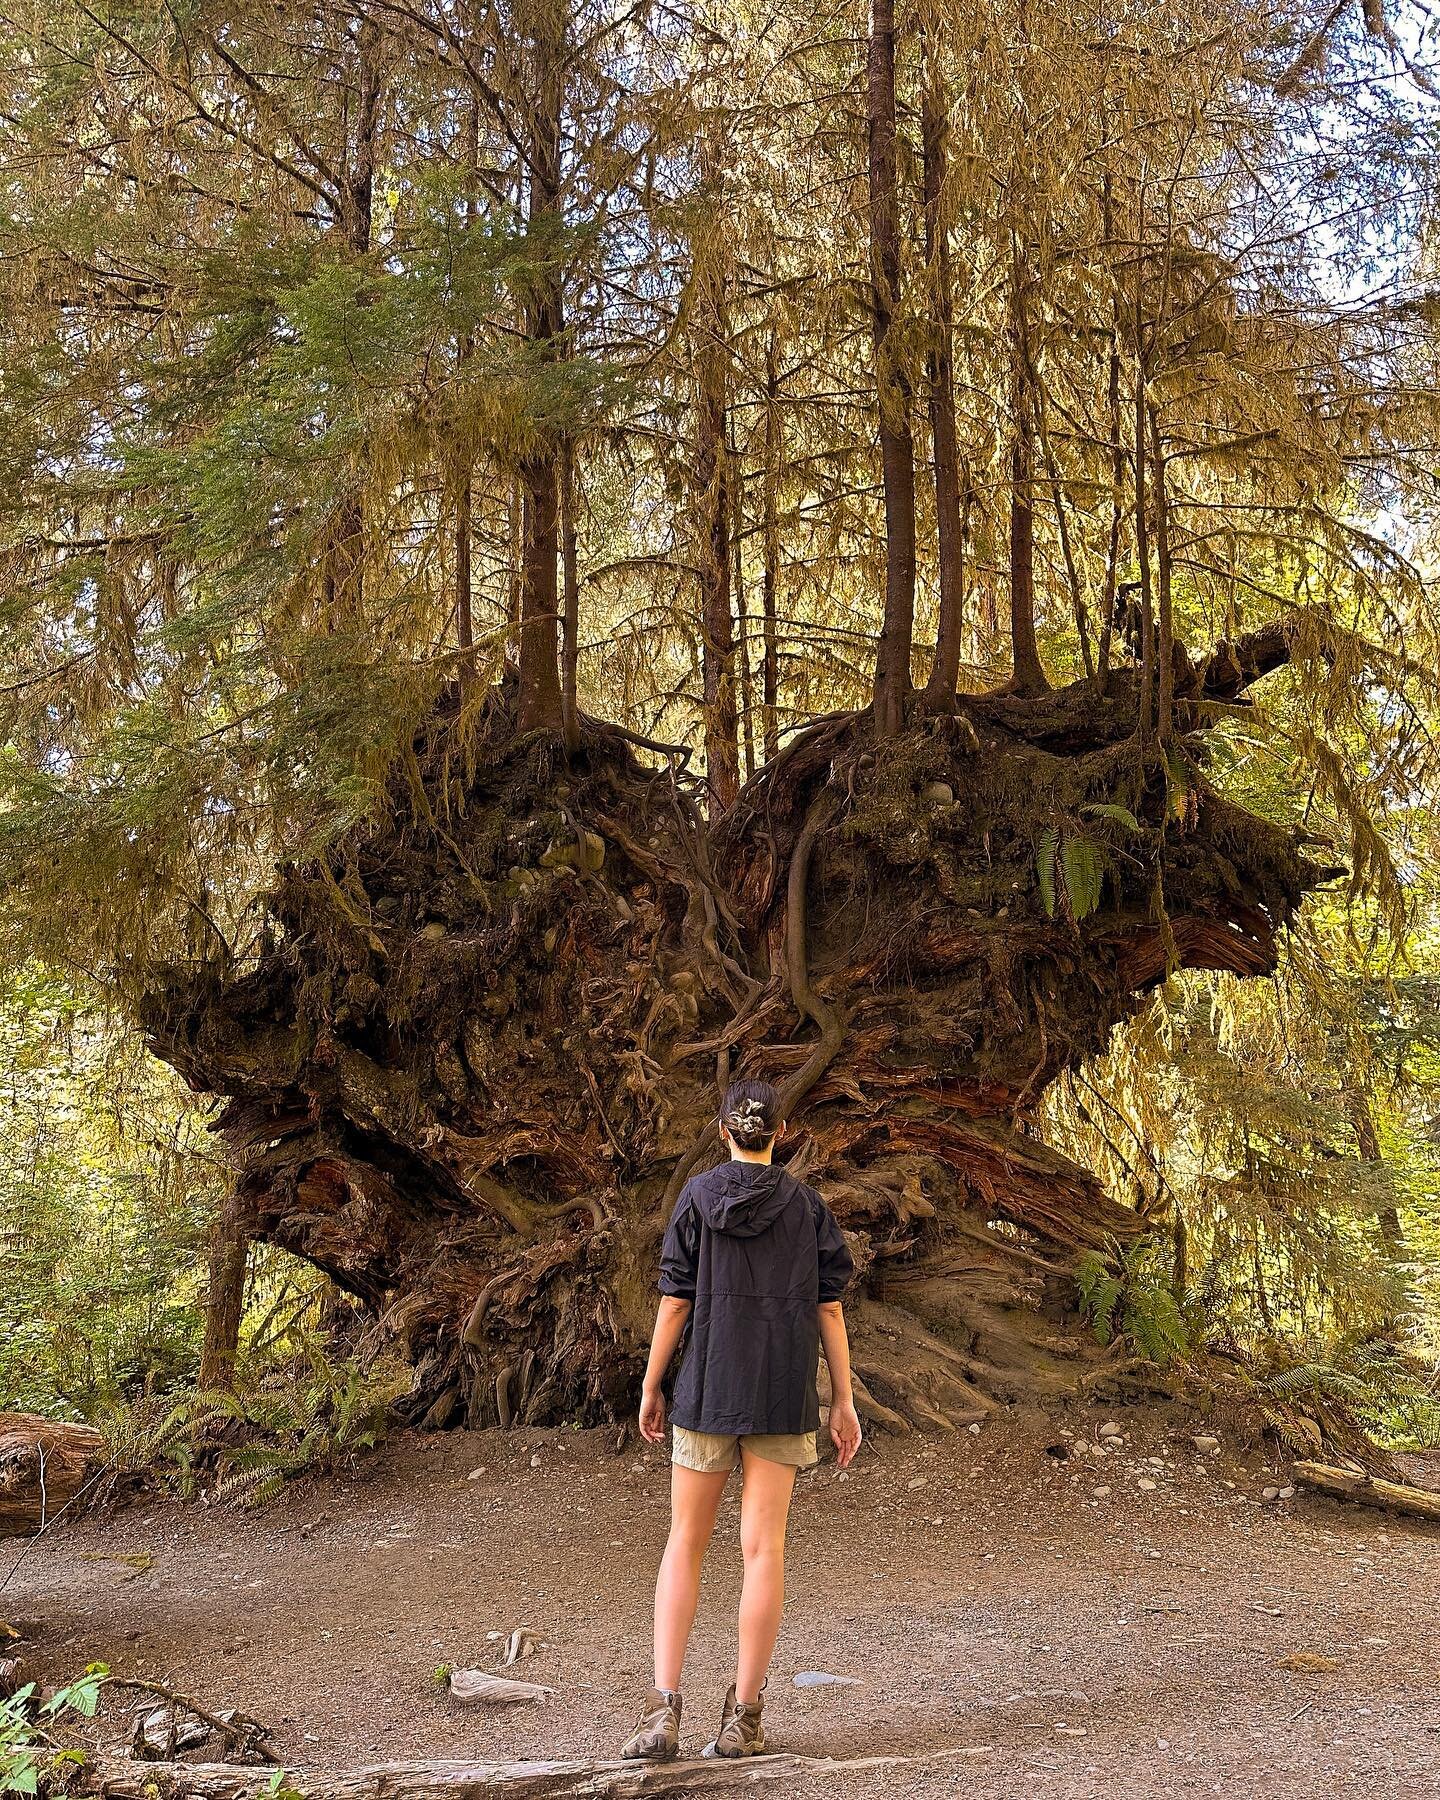 The Hoh Rainforest 

It&rsquo;s astounding to experience the vastly different environments in the west within such a short period of time. 

One minute we&rsquo;re getting tanned and sweaty in the desert, the next we&rsquo;re bundling up under rain j